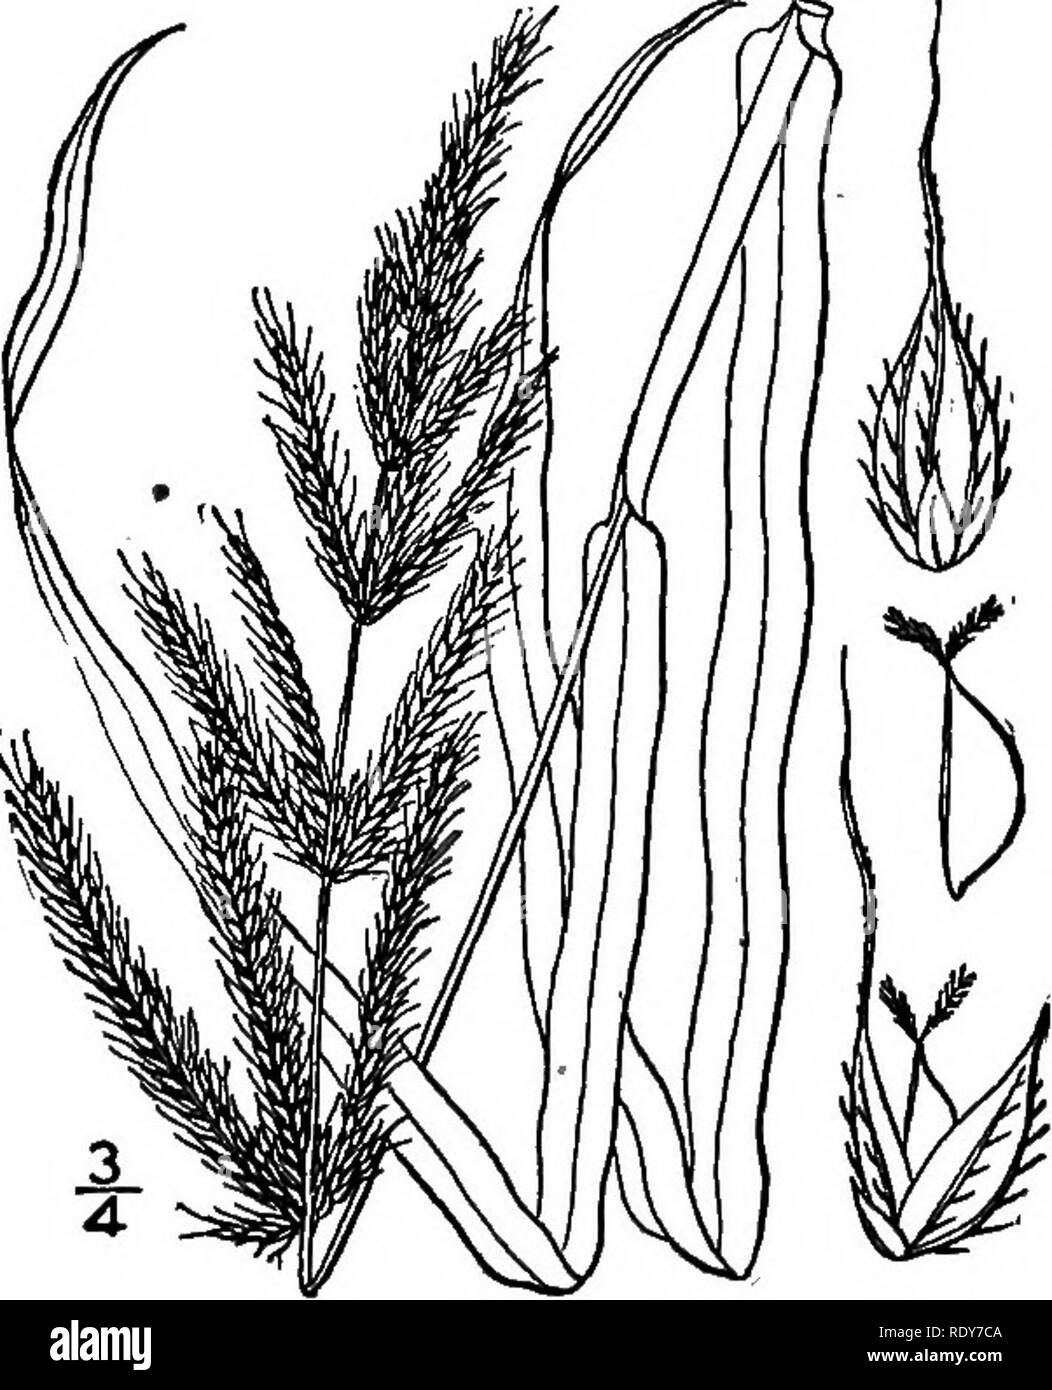 . The families of flowering plants. Plants; Phanerogams. M FAMILIES OF FLOWERING PLANTS.. Fig. 19.—Barnyard grass {Panicum Crus-gaUi). (After Britton and Brown, 111. m. Northern U. S.) gions to the lofty arborescent bamboos of the tropics. The inflores- cence consists of what are technically called spikelets, each of which is made up of small imbricated chaffy scales. Some of these scales are empty; others enclose the sta- mens, usually three in number, and the pistil; and each of these flower- bearing scales usually encloses an additional, very slender scale known as the palet. Every individu Stock Photo